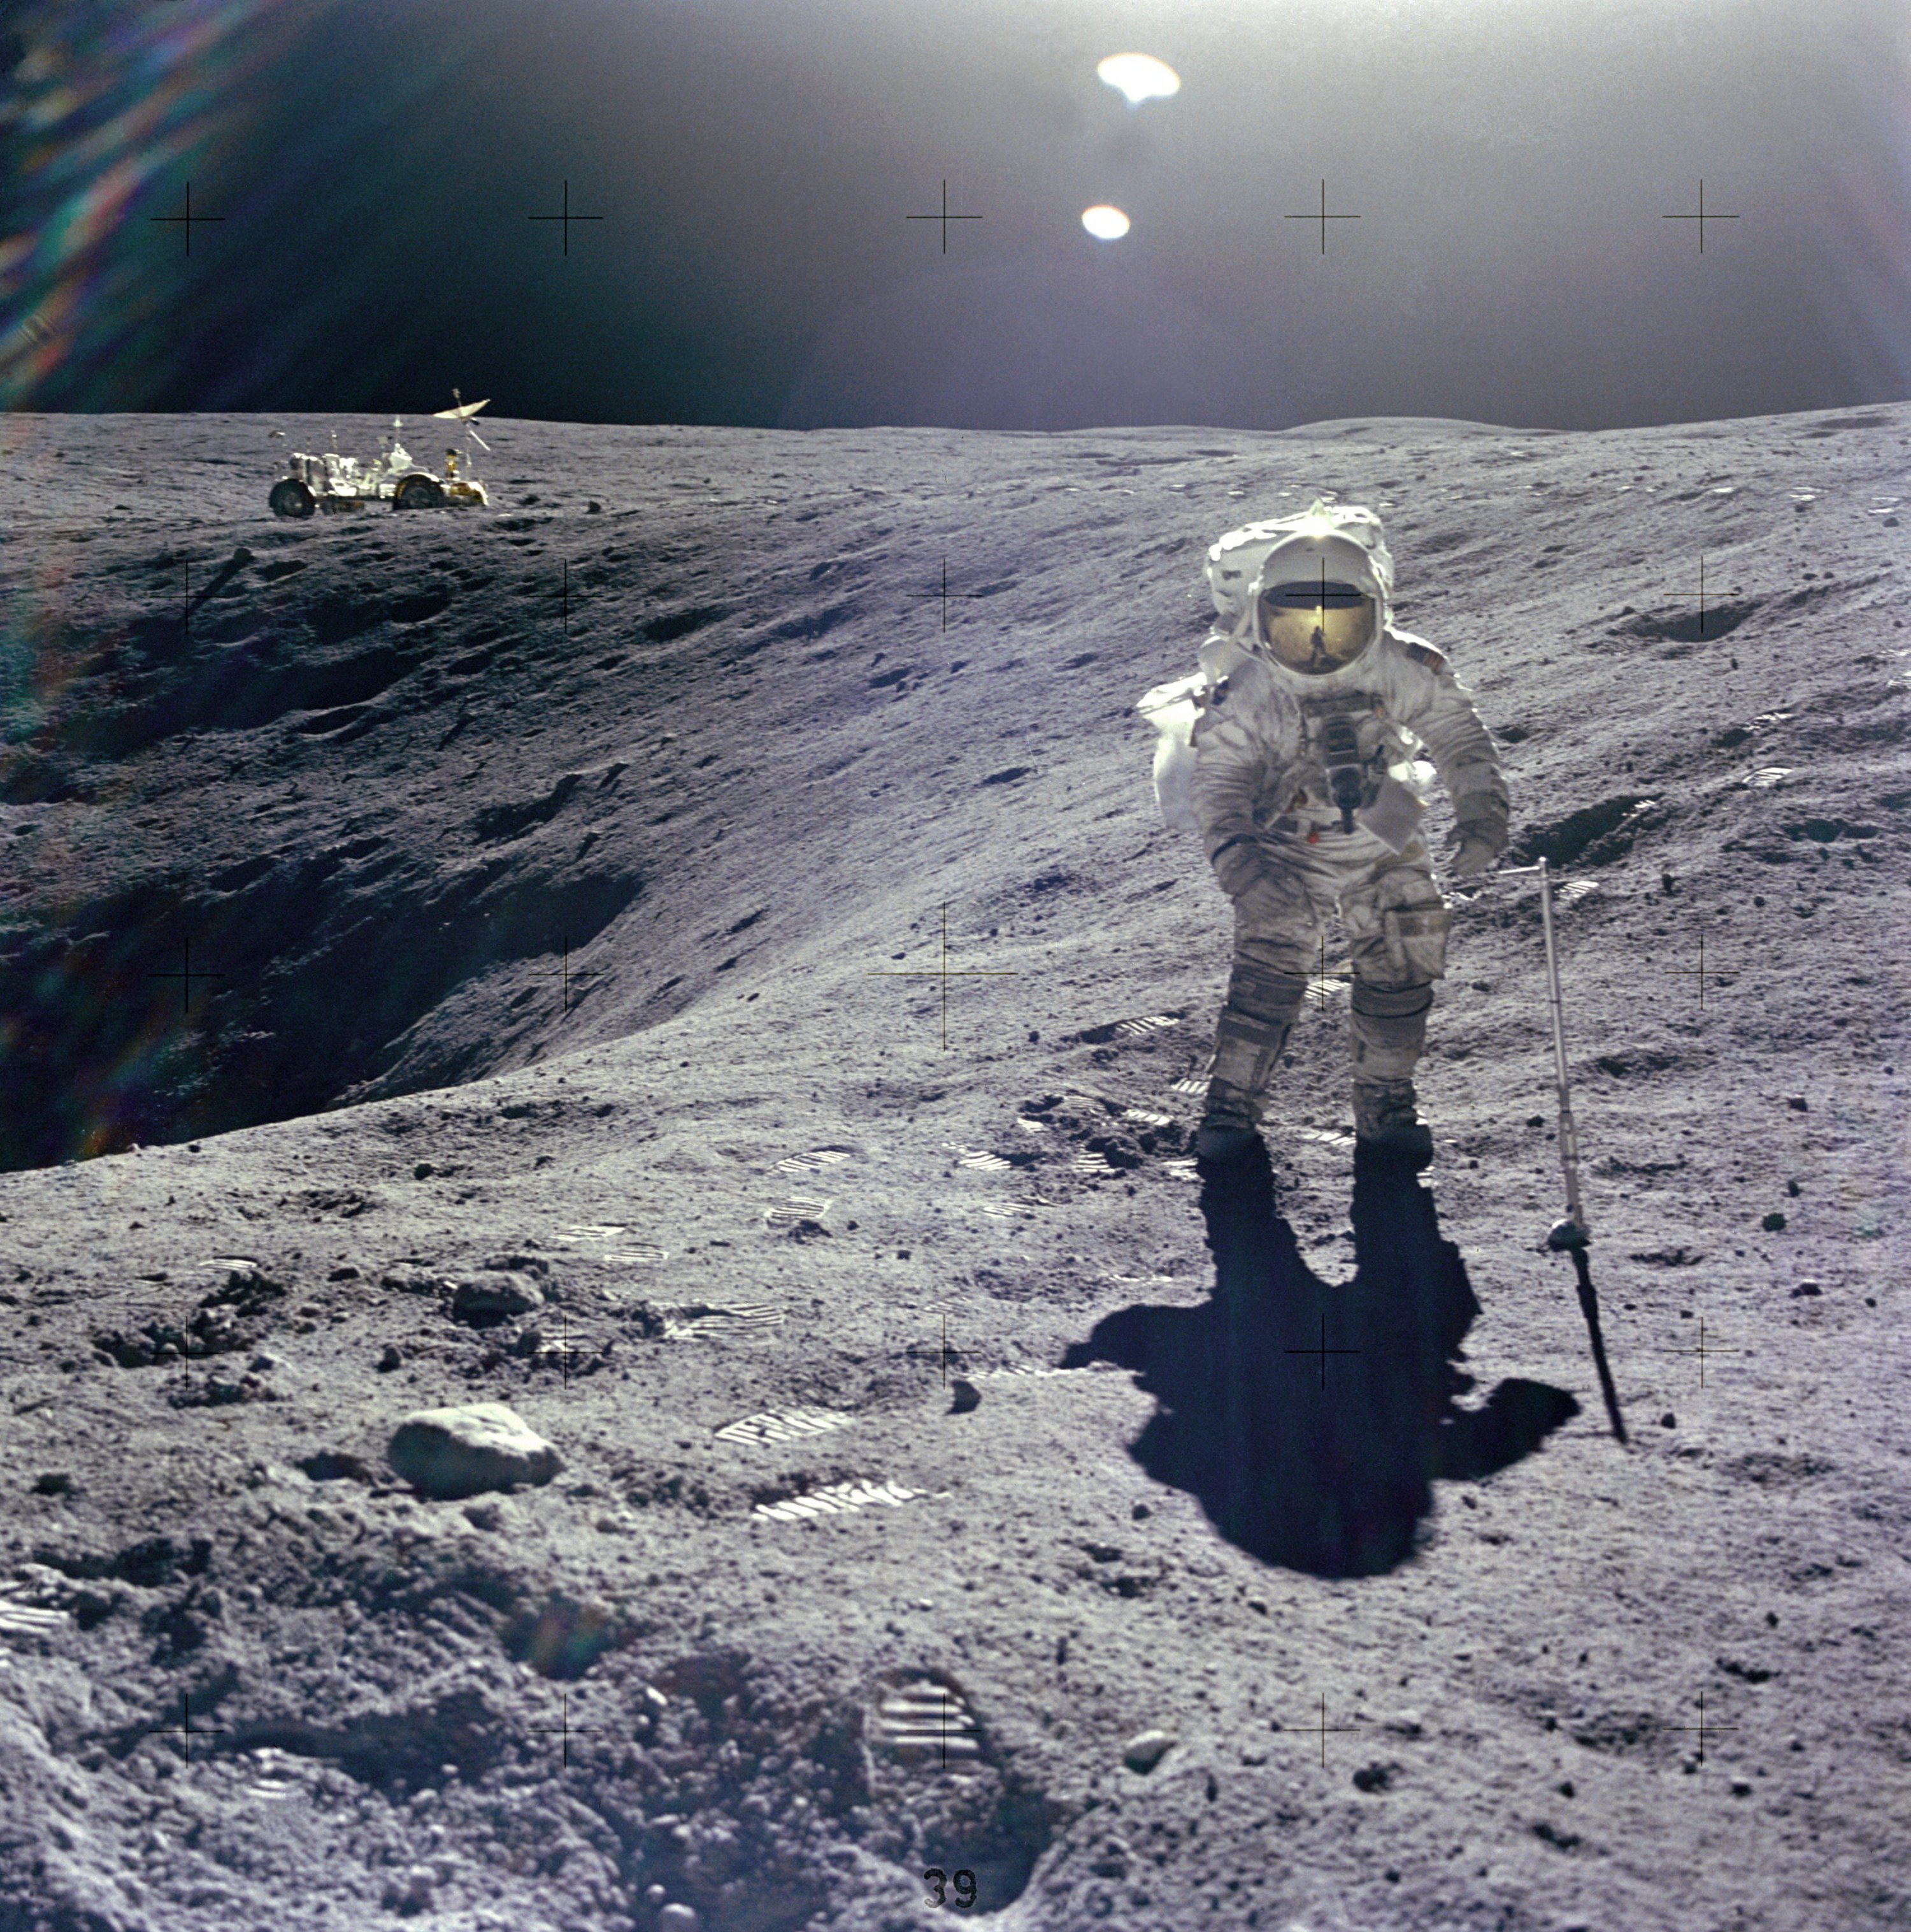 Astronaut and moon rover next to crater on the moon